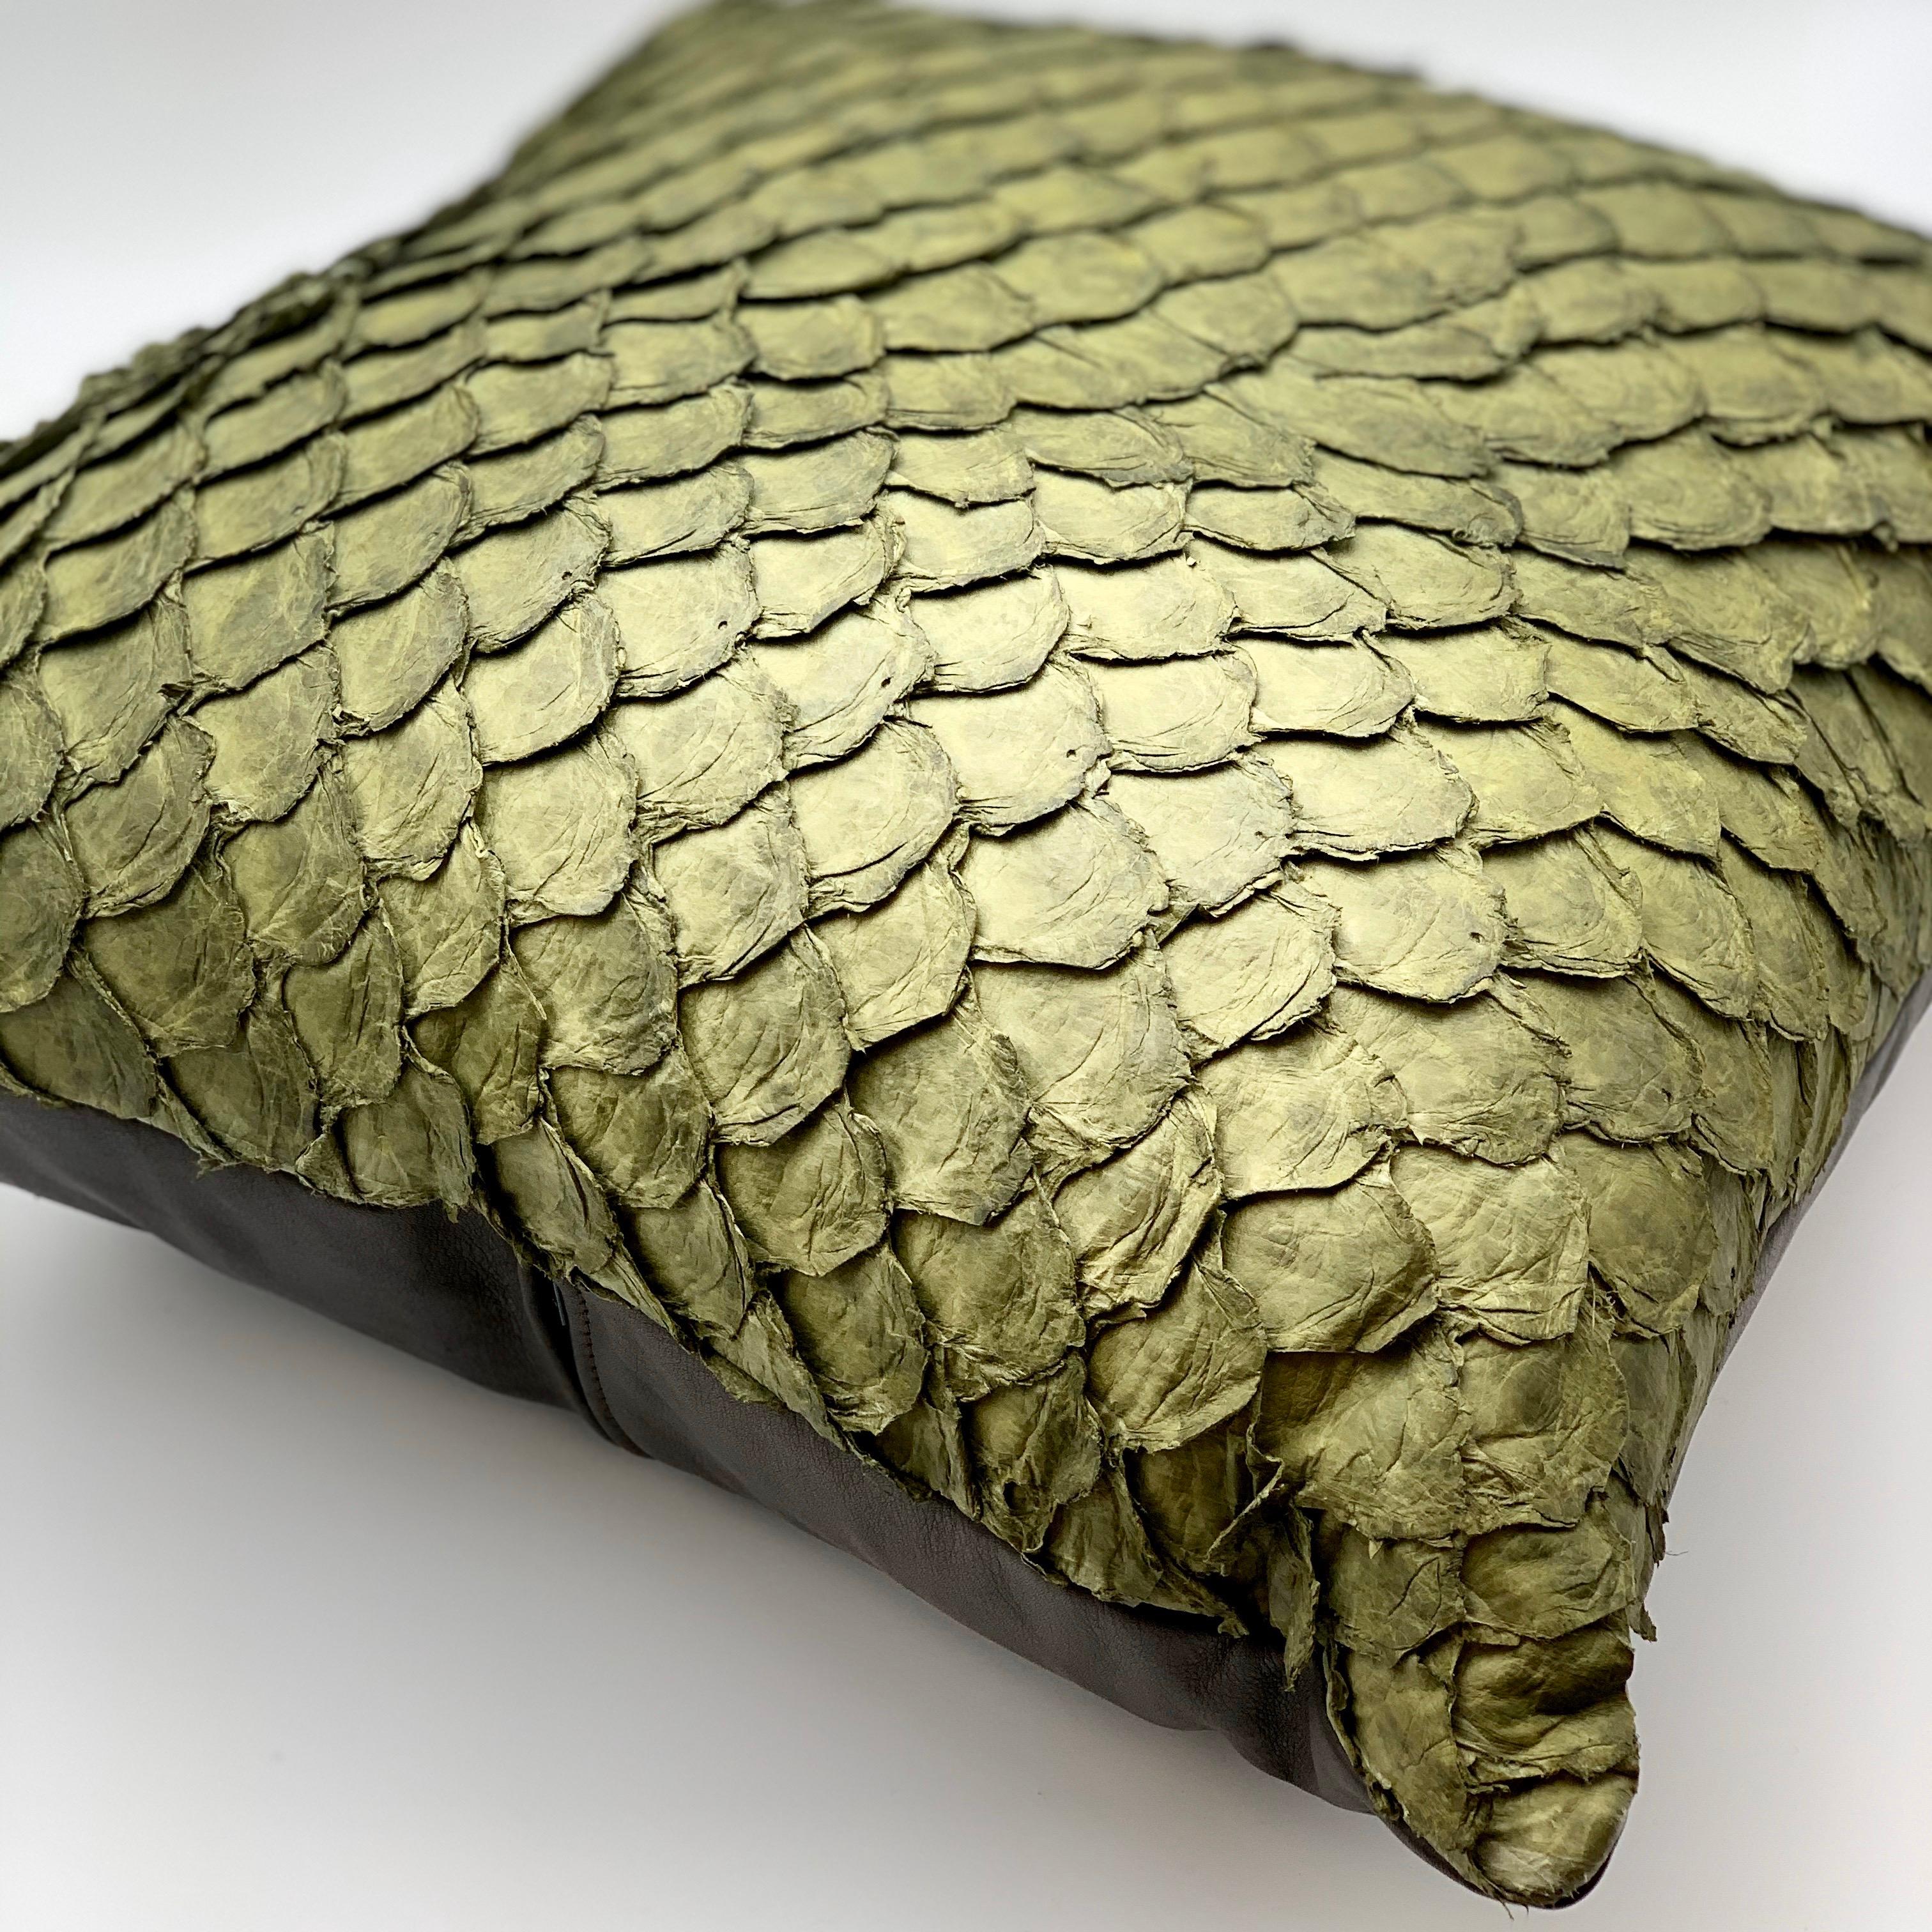 The Pirarucu fish leather cushion. Pirarucu fish comes from Brazilian food industry, it is the second largest river fish in the world after the beluga. Vegetable taning and dyed with anilines. Down feather insert. 

Sizes variable and made to